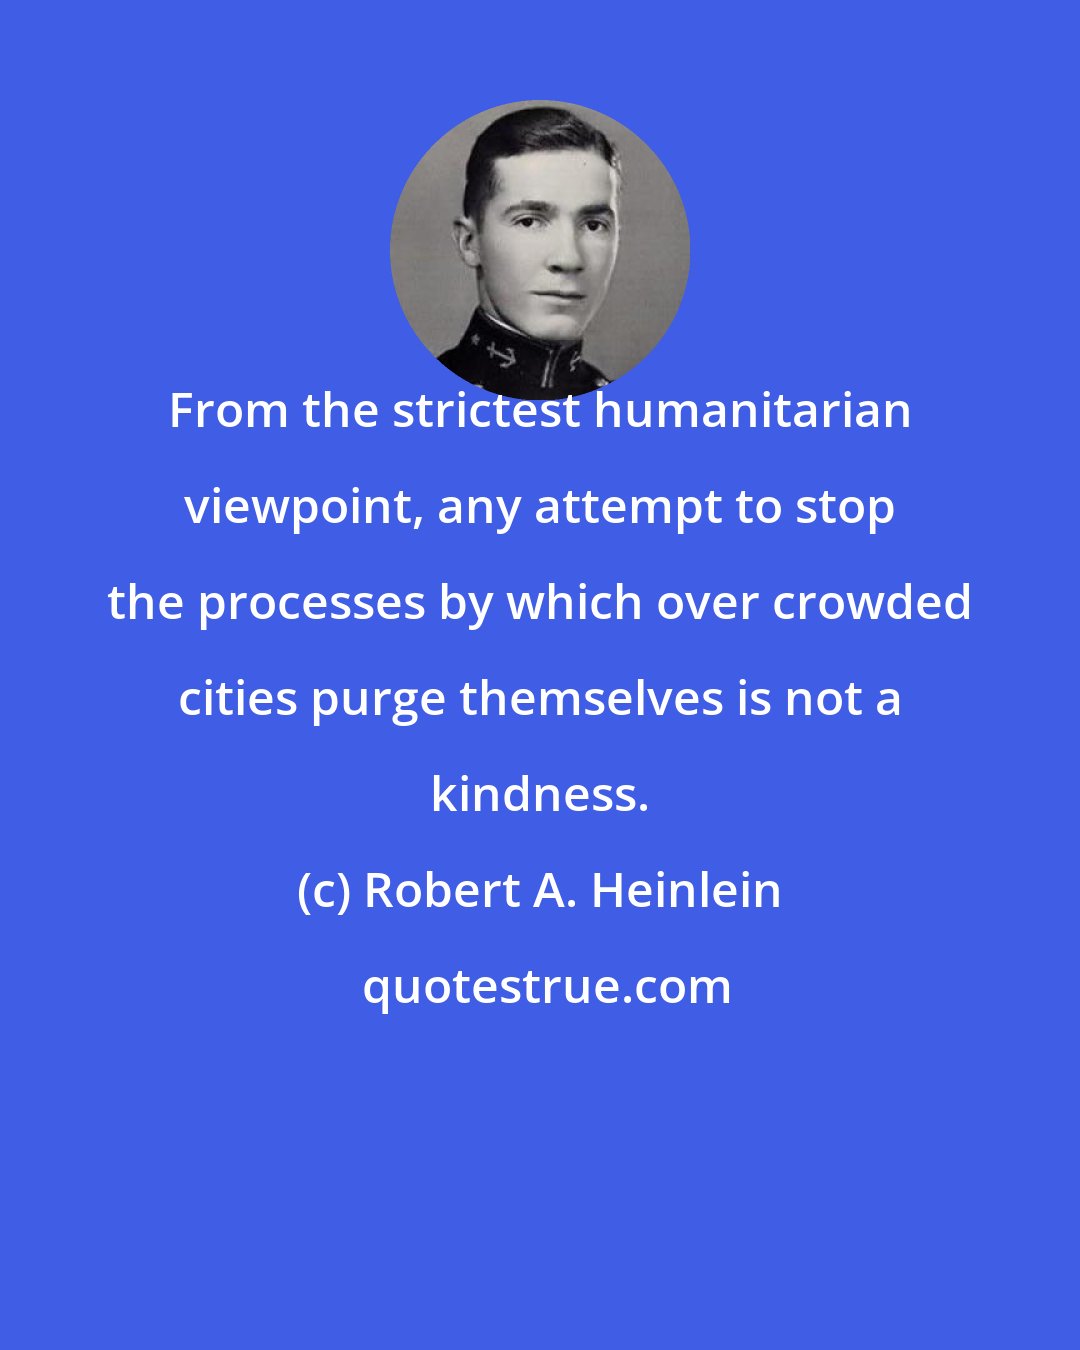 Robert A. Heinlein: From the strictest humanitarian viewpoint, any attempt to stop the processes by which over crowded cities purge themselves is not a kindness.